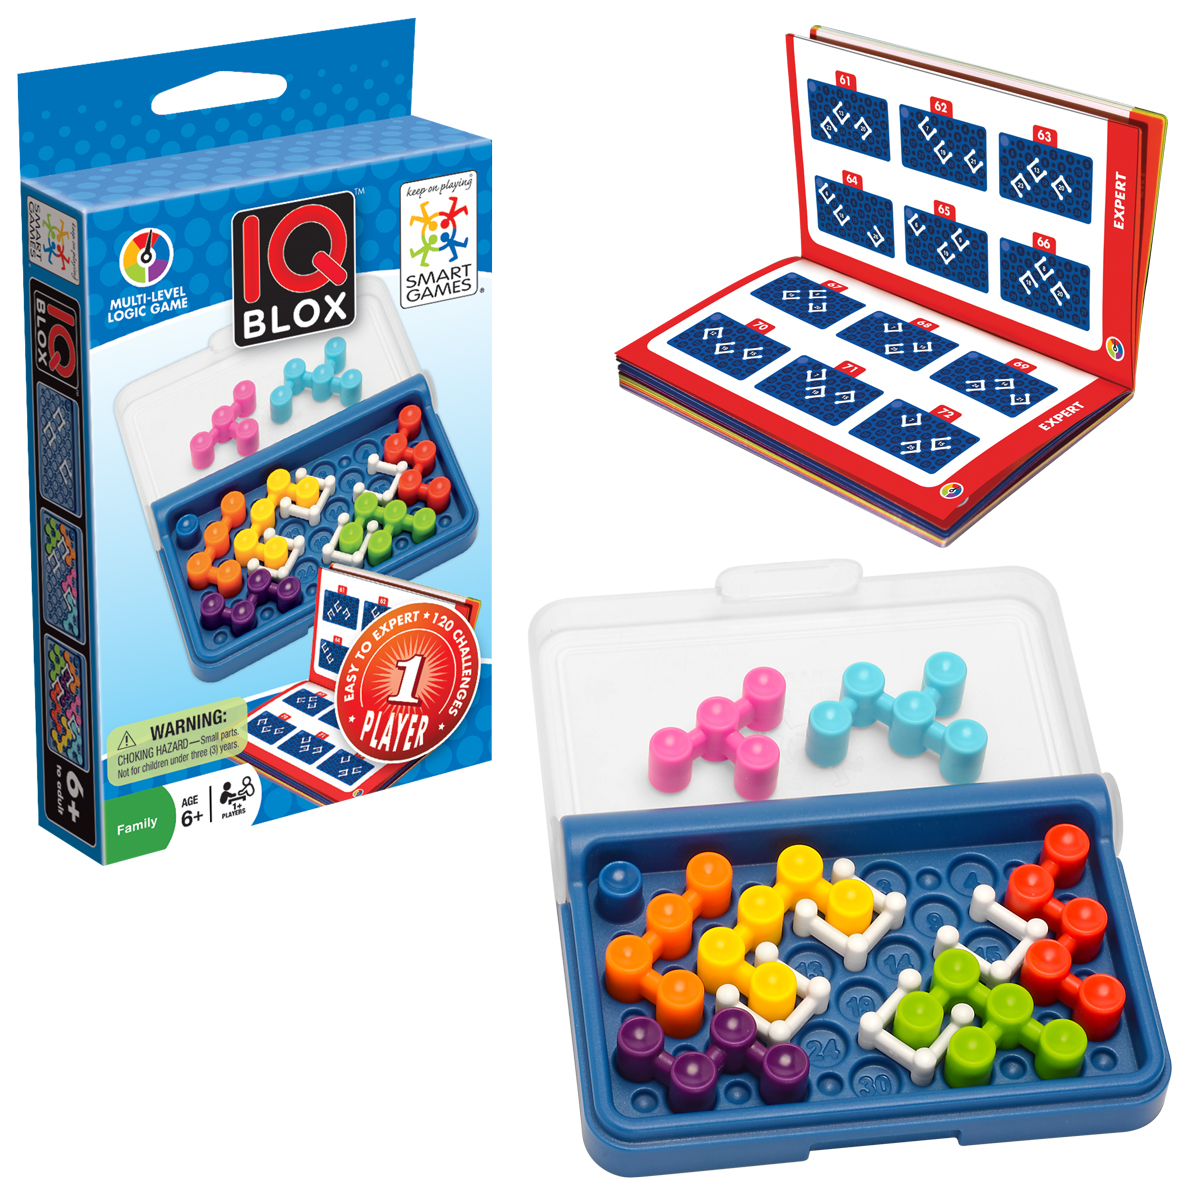 IQ-Blox-(pack+product+booklet).jpg